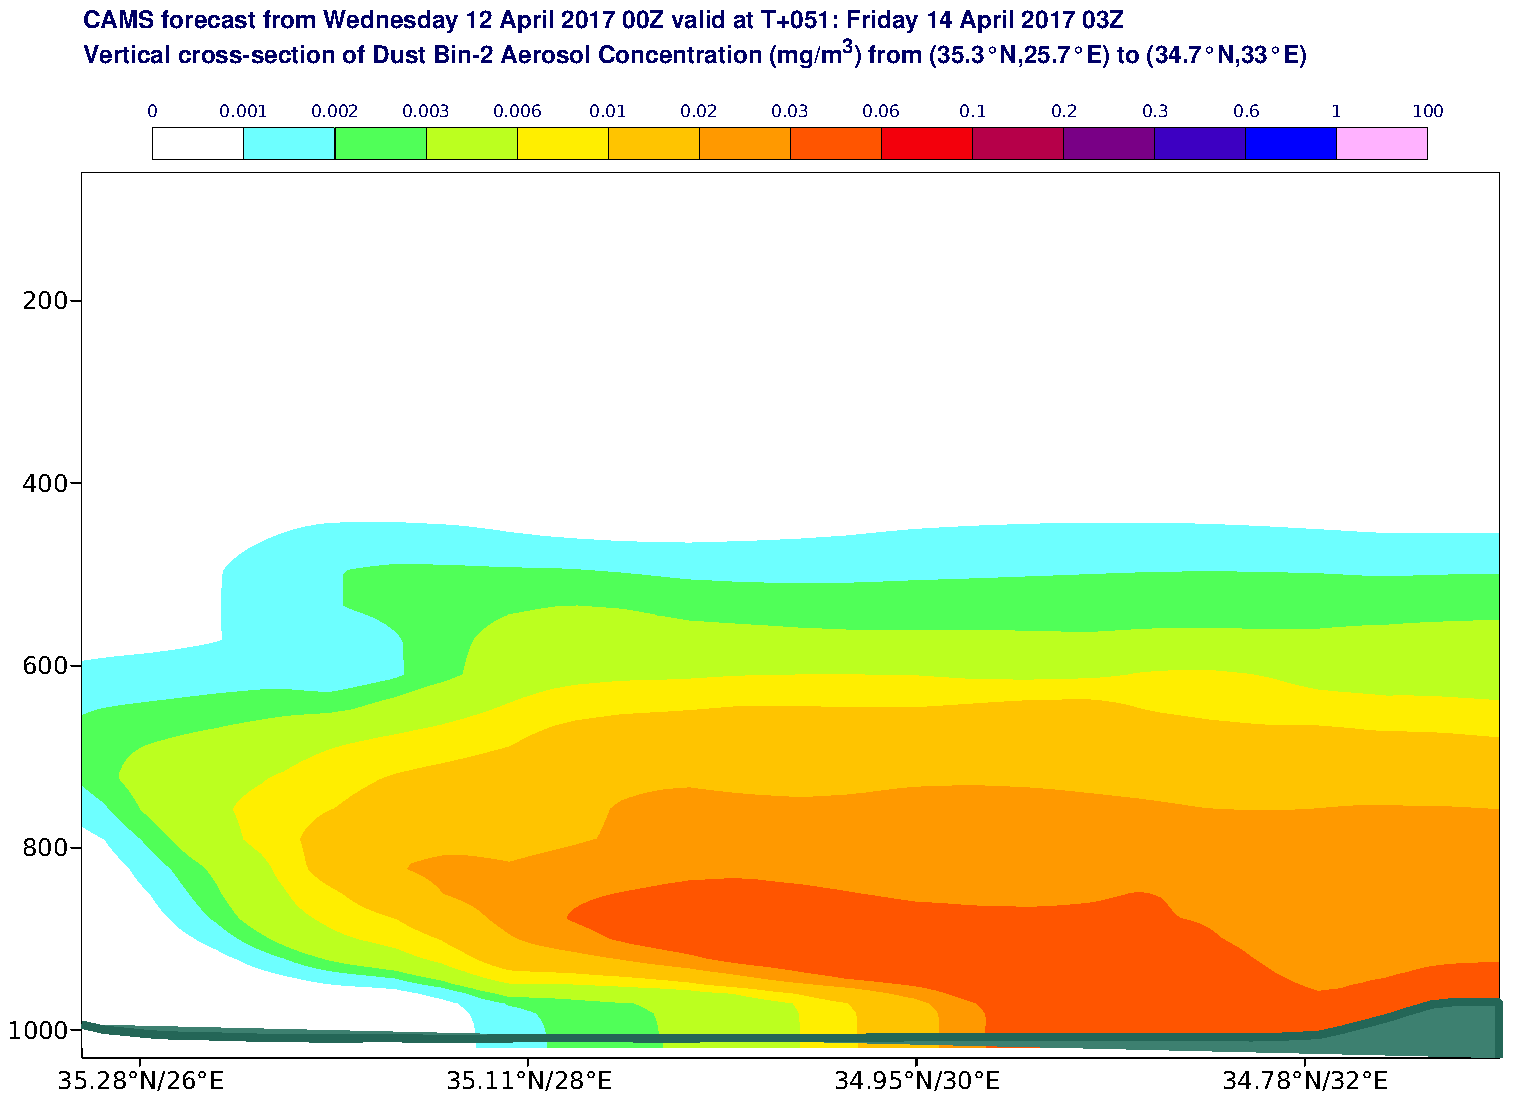 Vertical cross-section of Dust Bin-2 Aerosol Concentration (mg/m3) valid at T51 - 2017-04-14 03:00